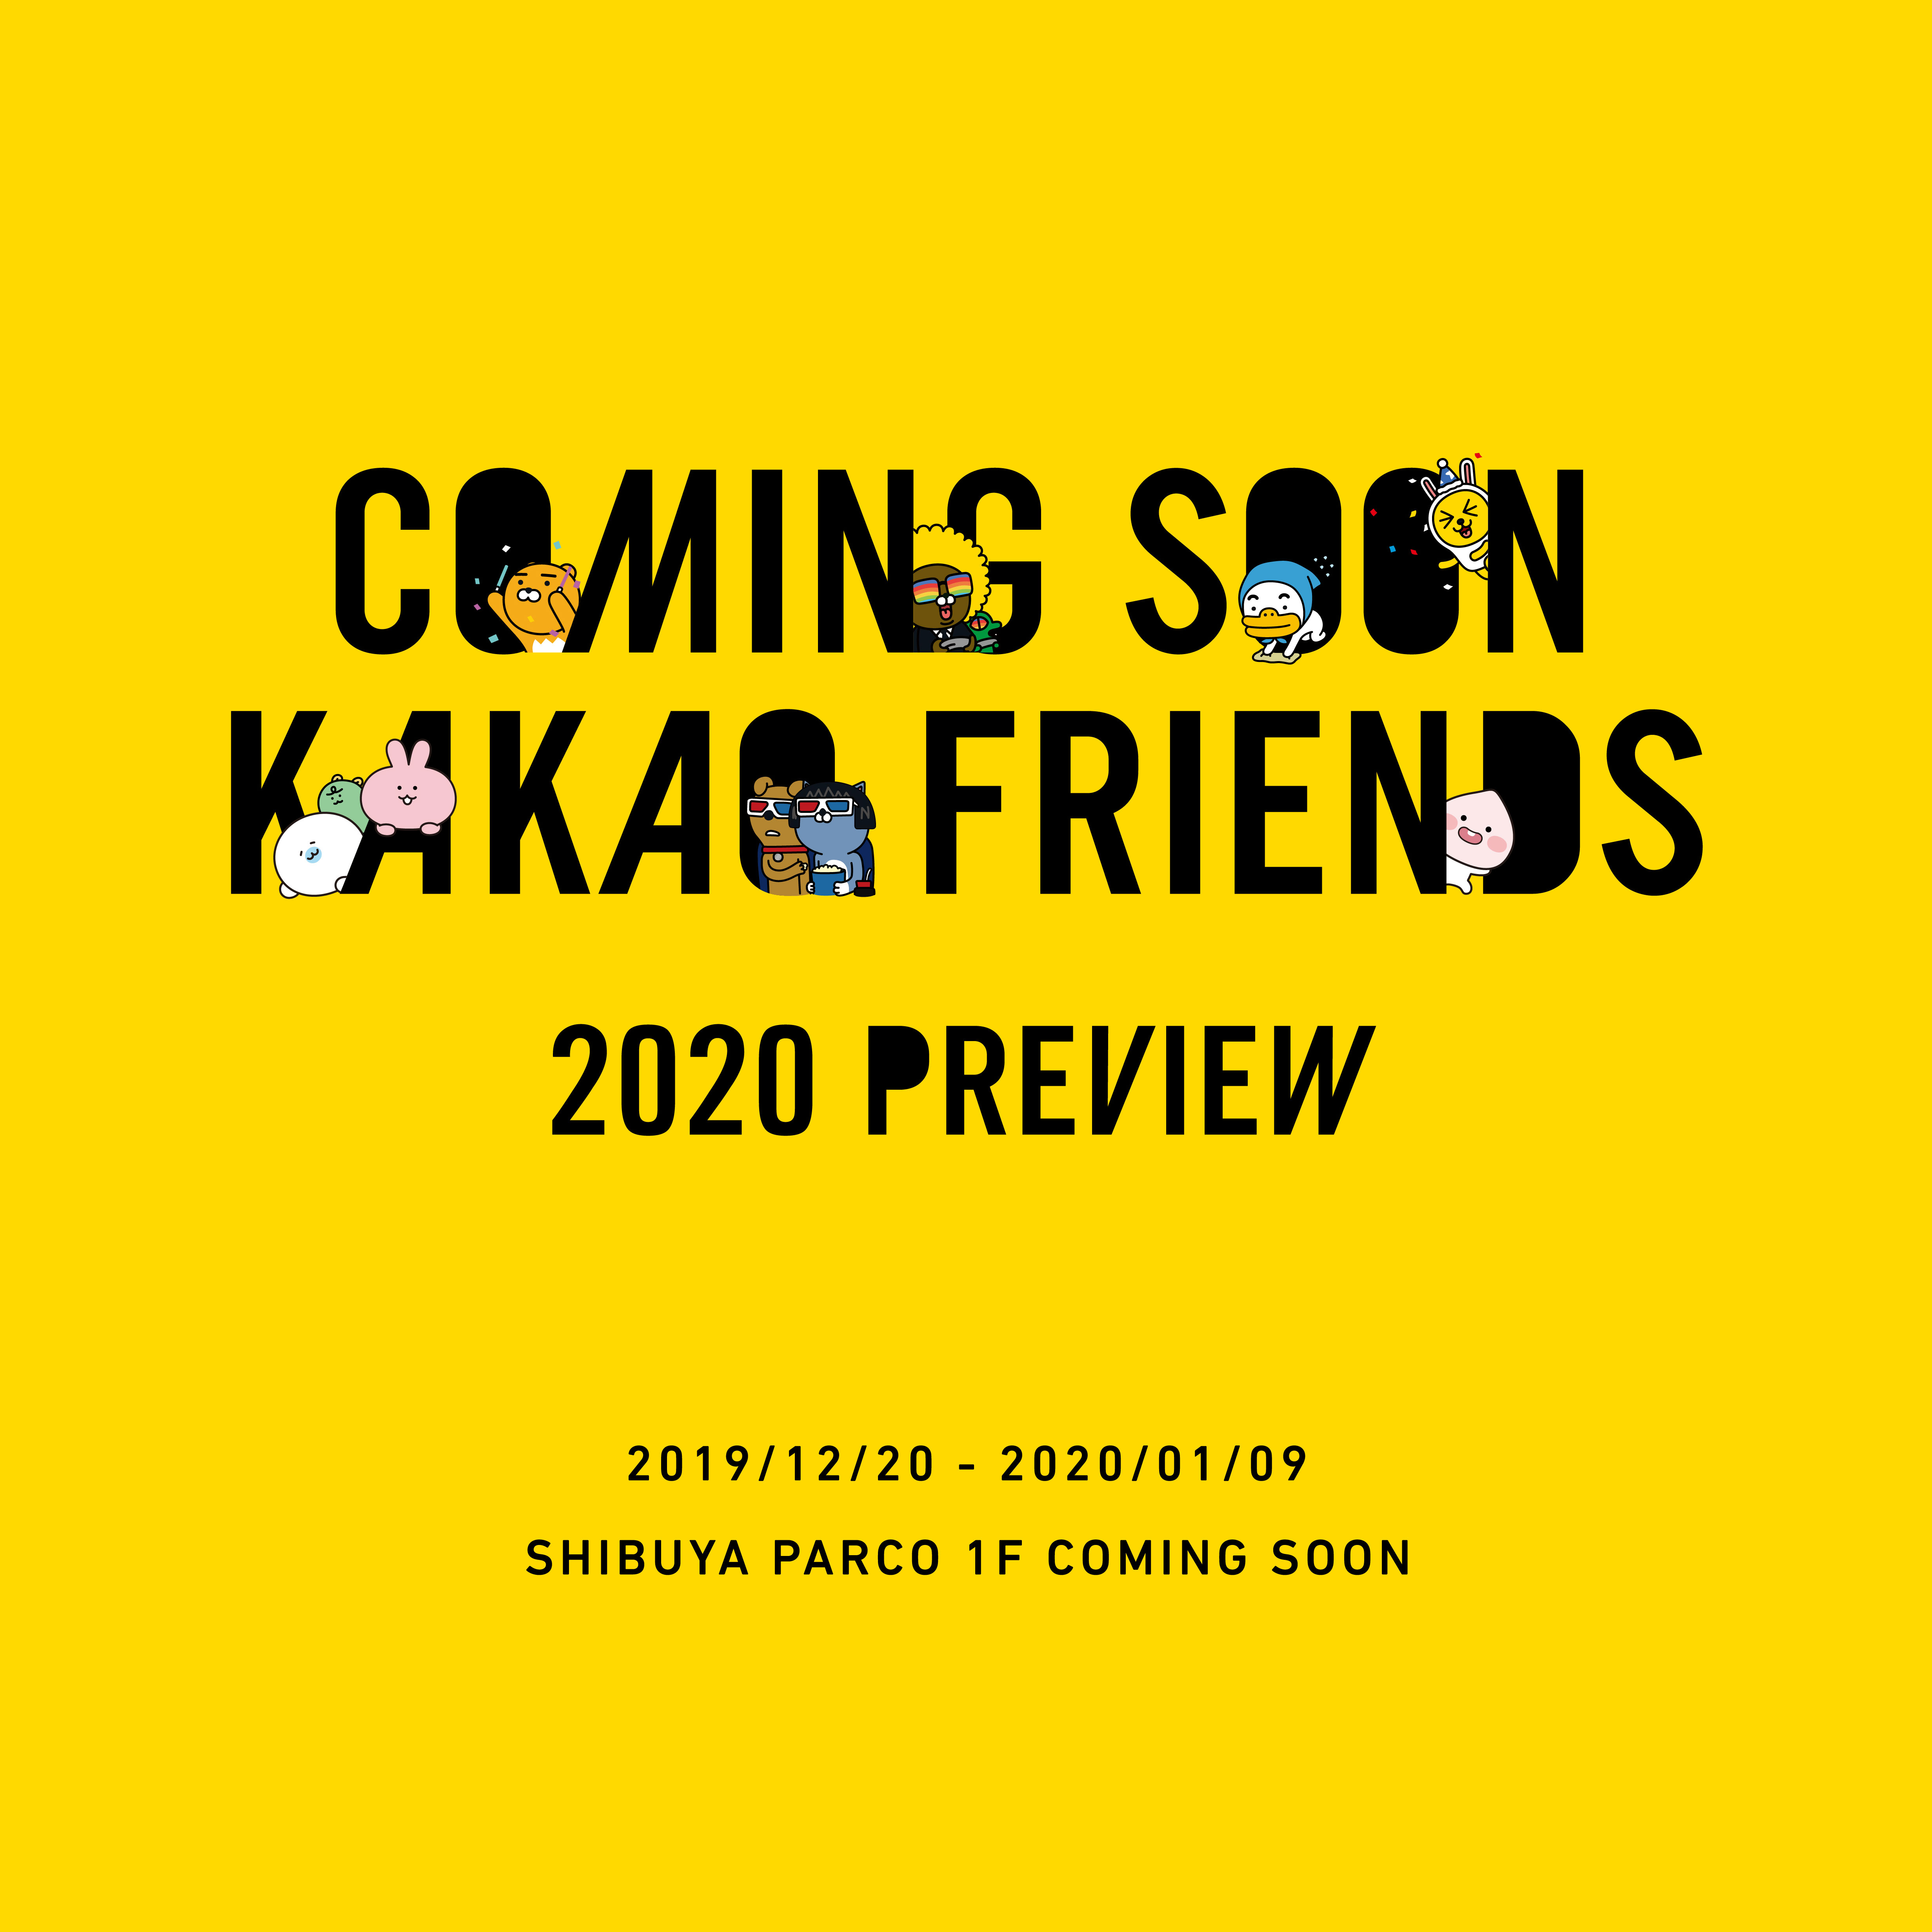 Kakao Friends 渋谷parco Pop Up Store Comingsoon 食のニュース